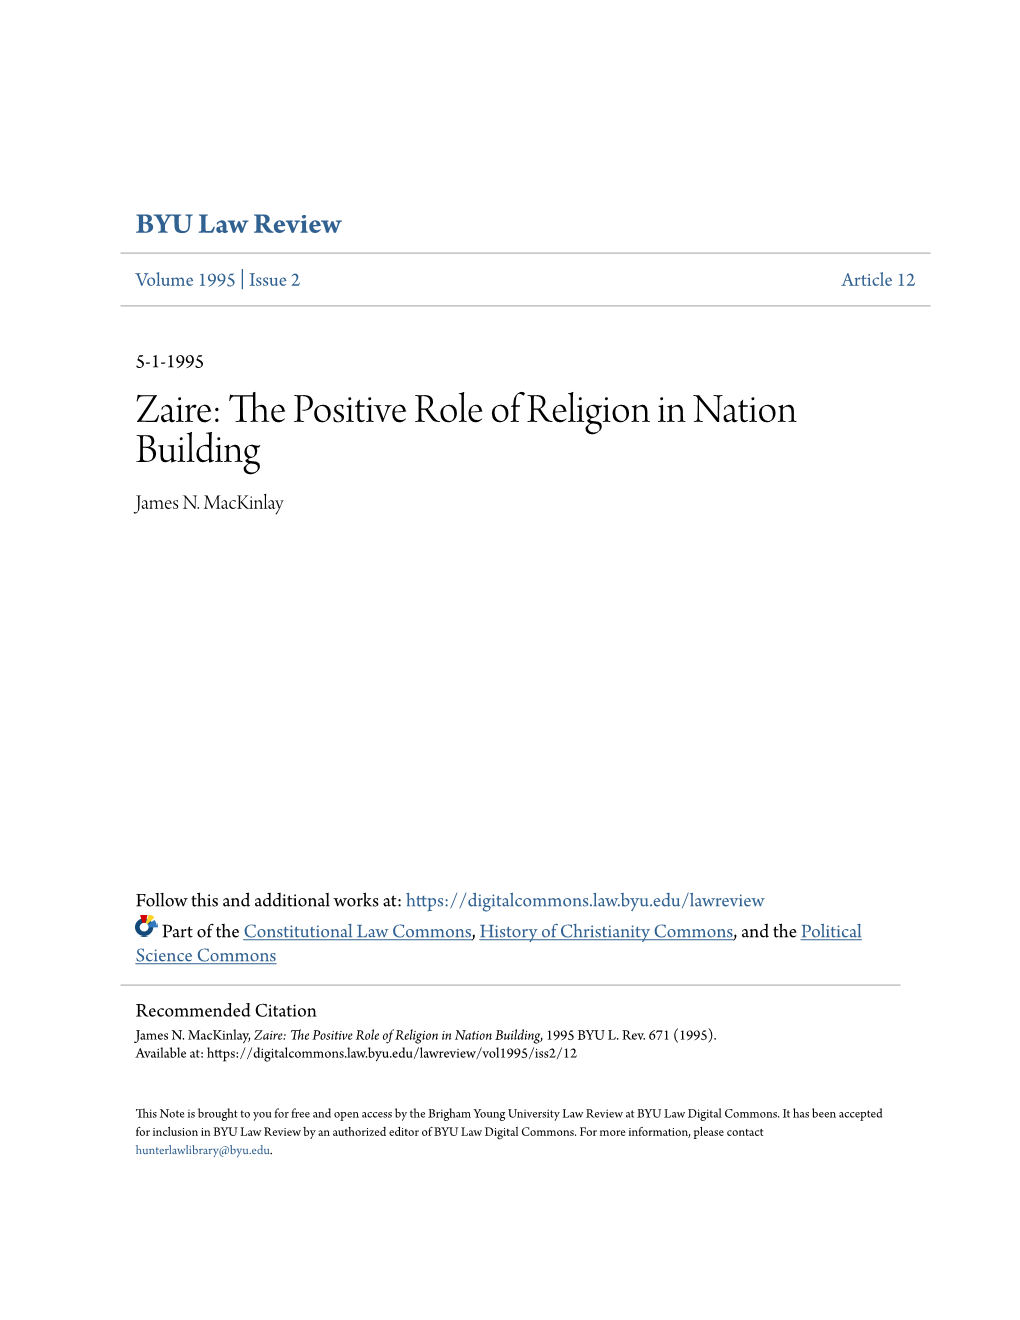 Zaire: the Positive Role of Religion in Nation Building, 1995 BYU L